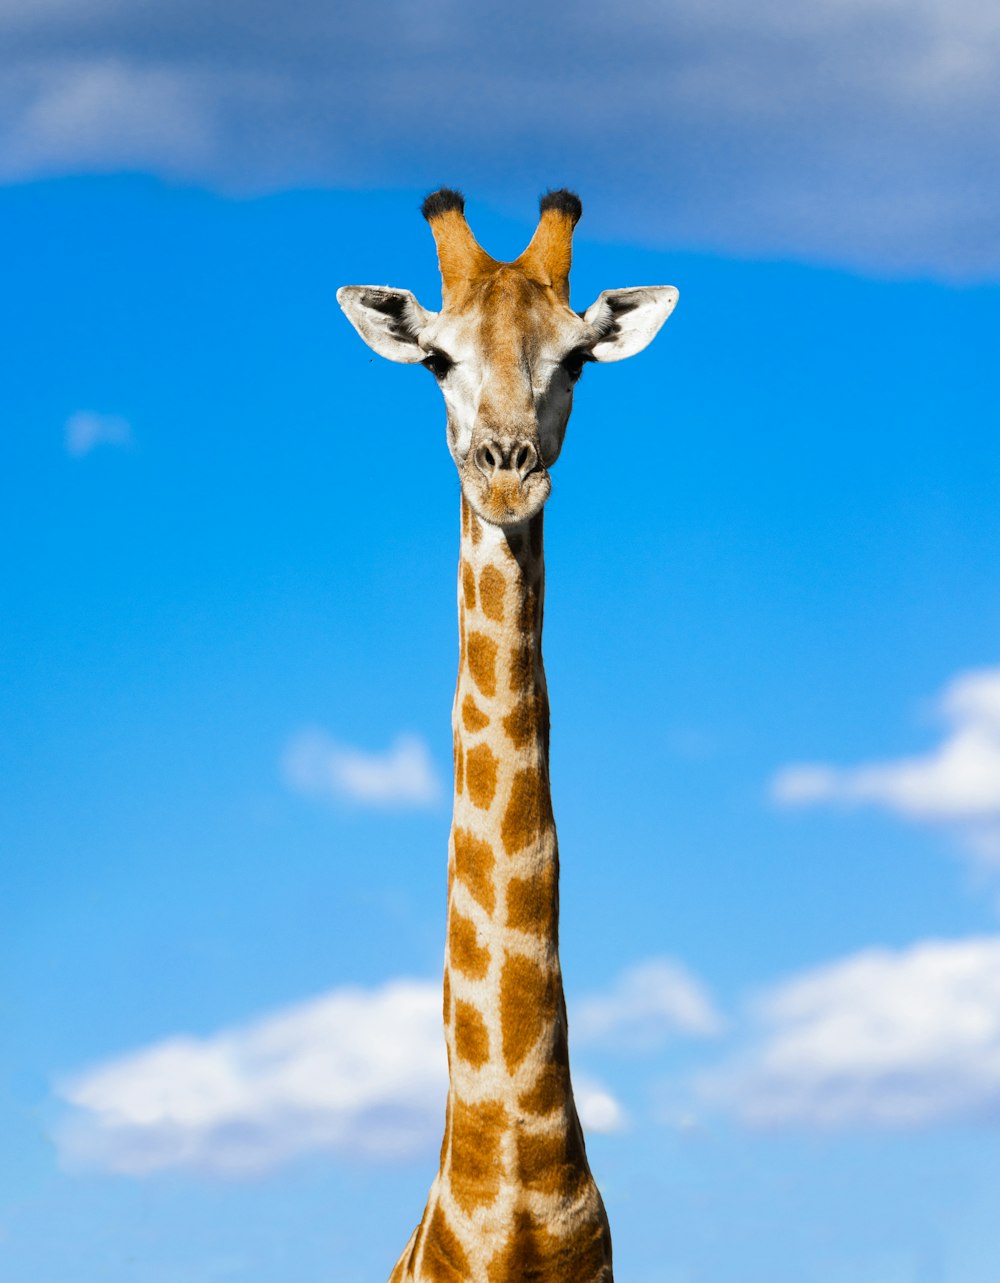 a giraffe standing in a field with a blue sky in the background